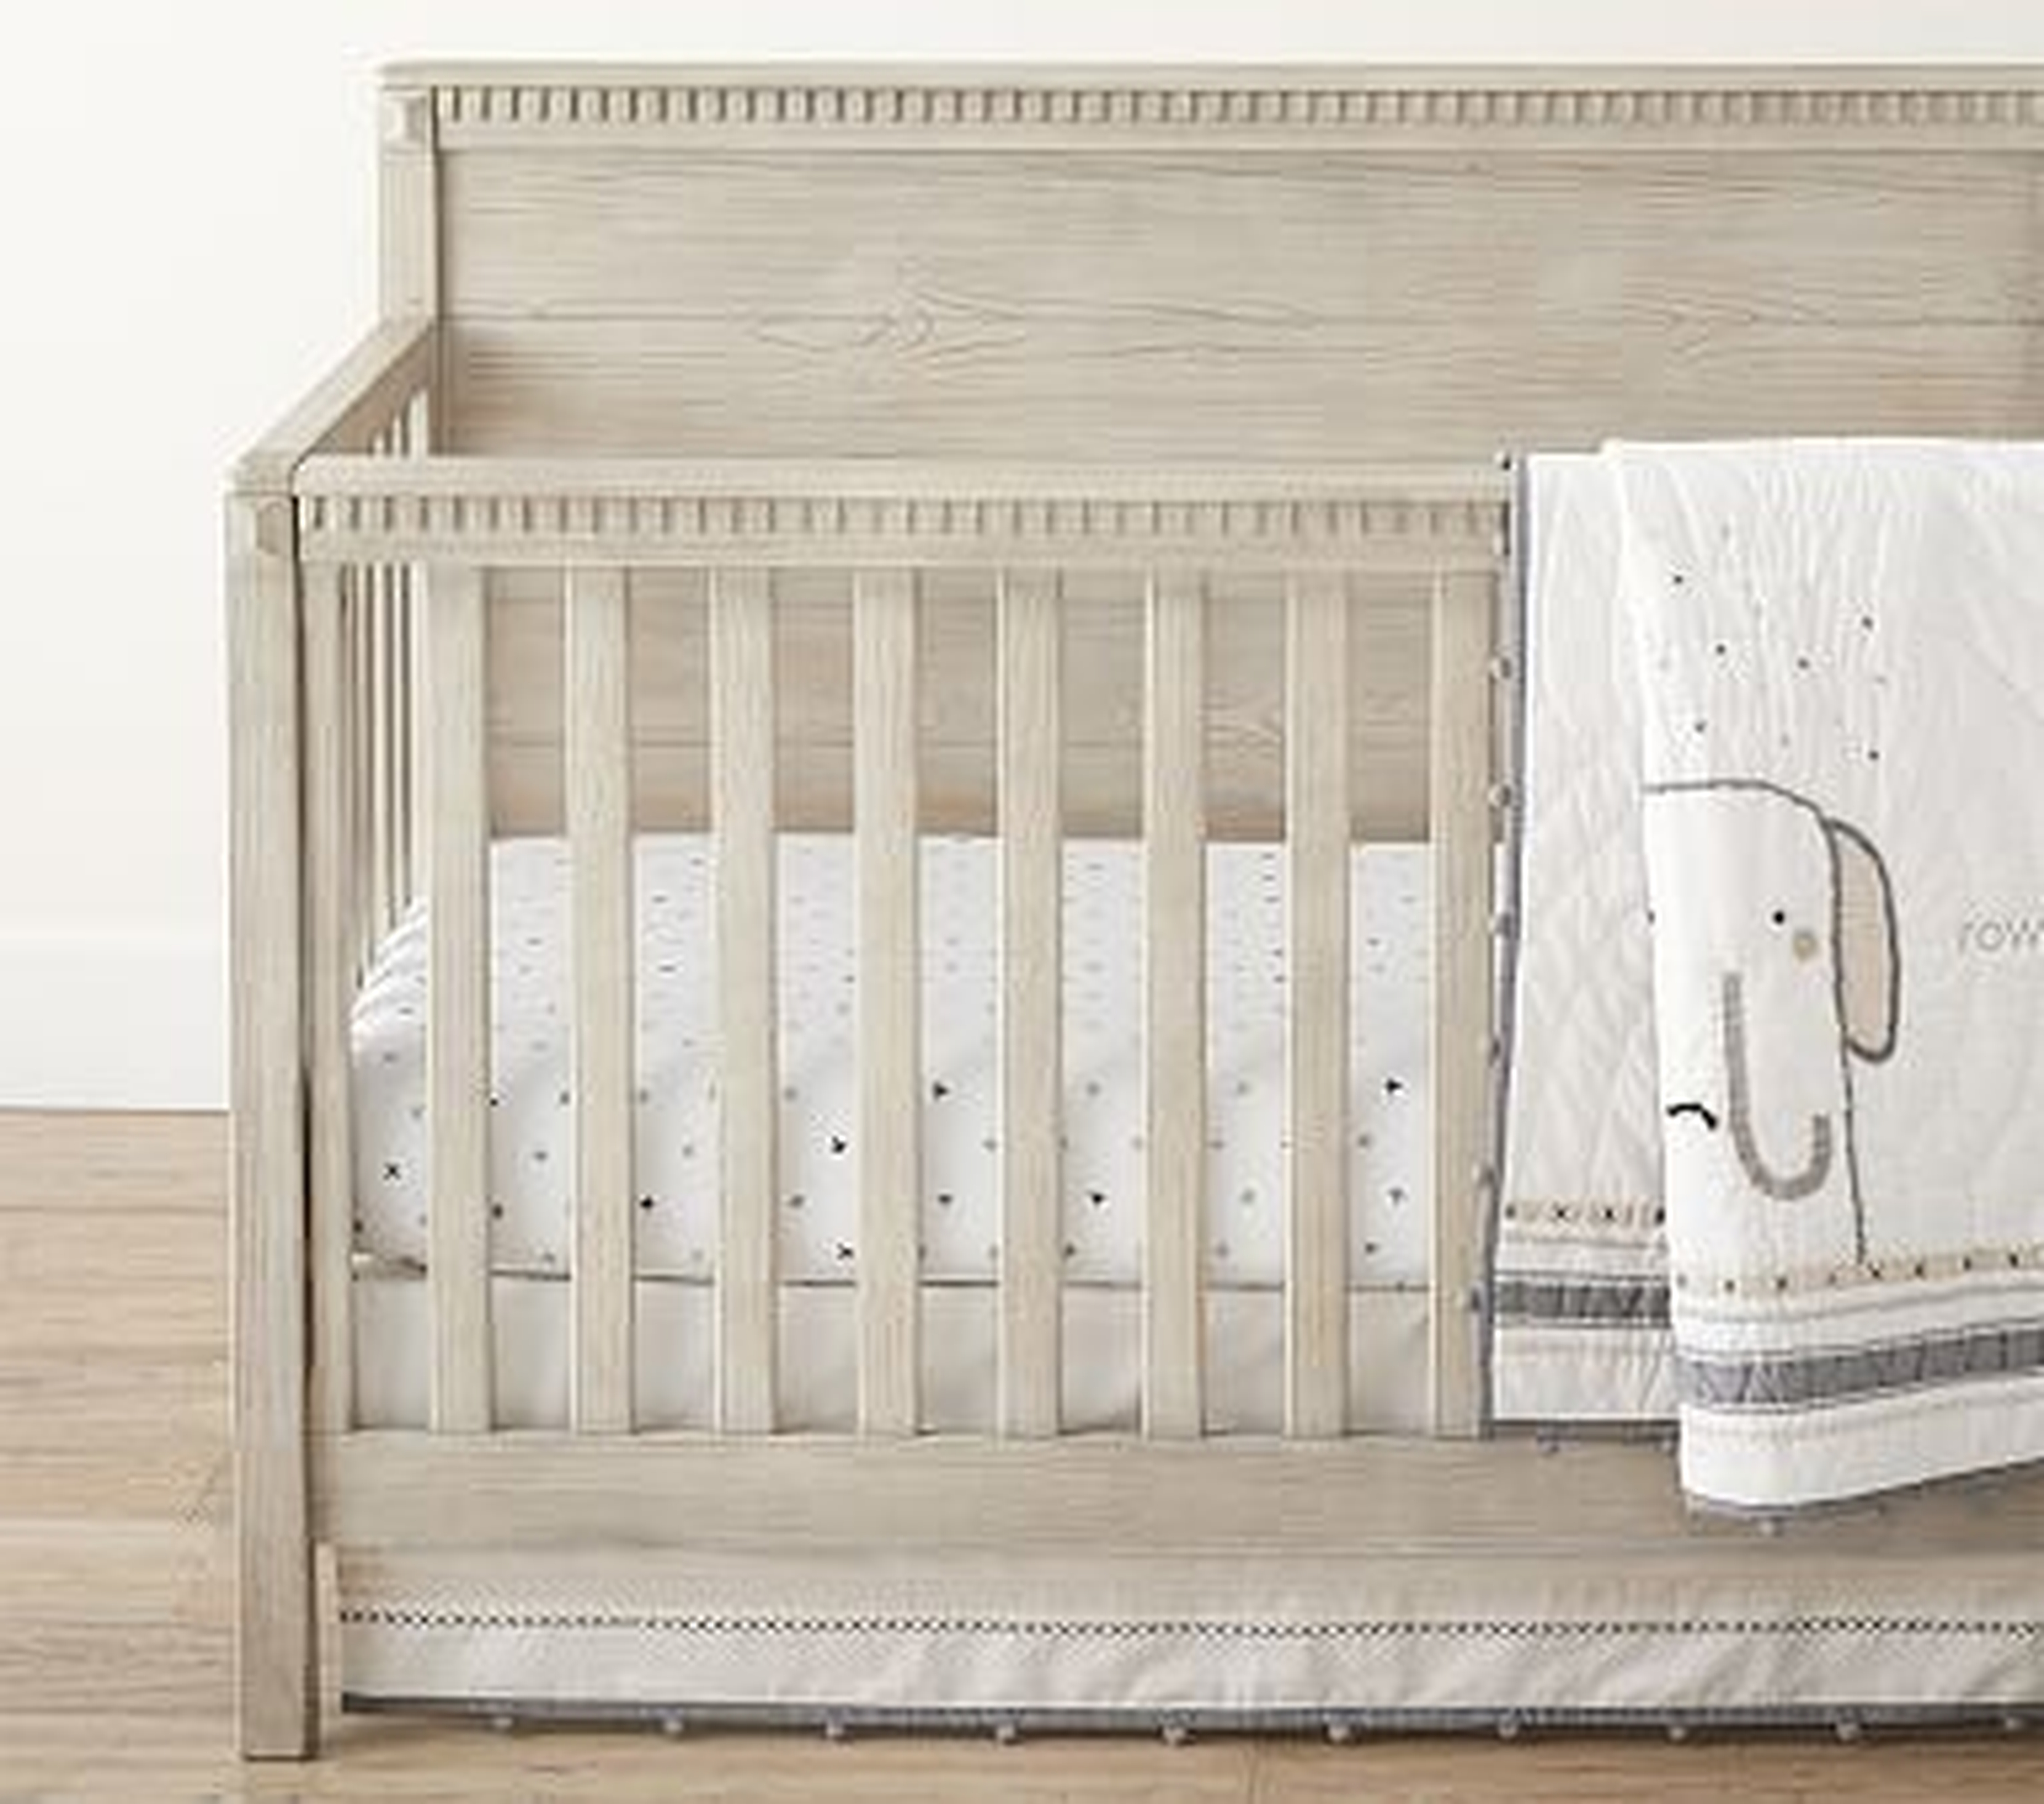 Rowan Quilt Set with Stitch Crib Fitted Sheet - Pottery Barn Kids